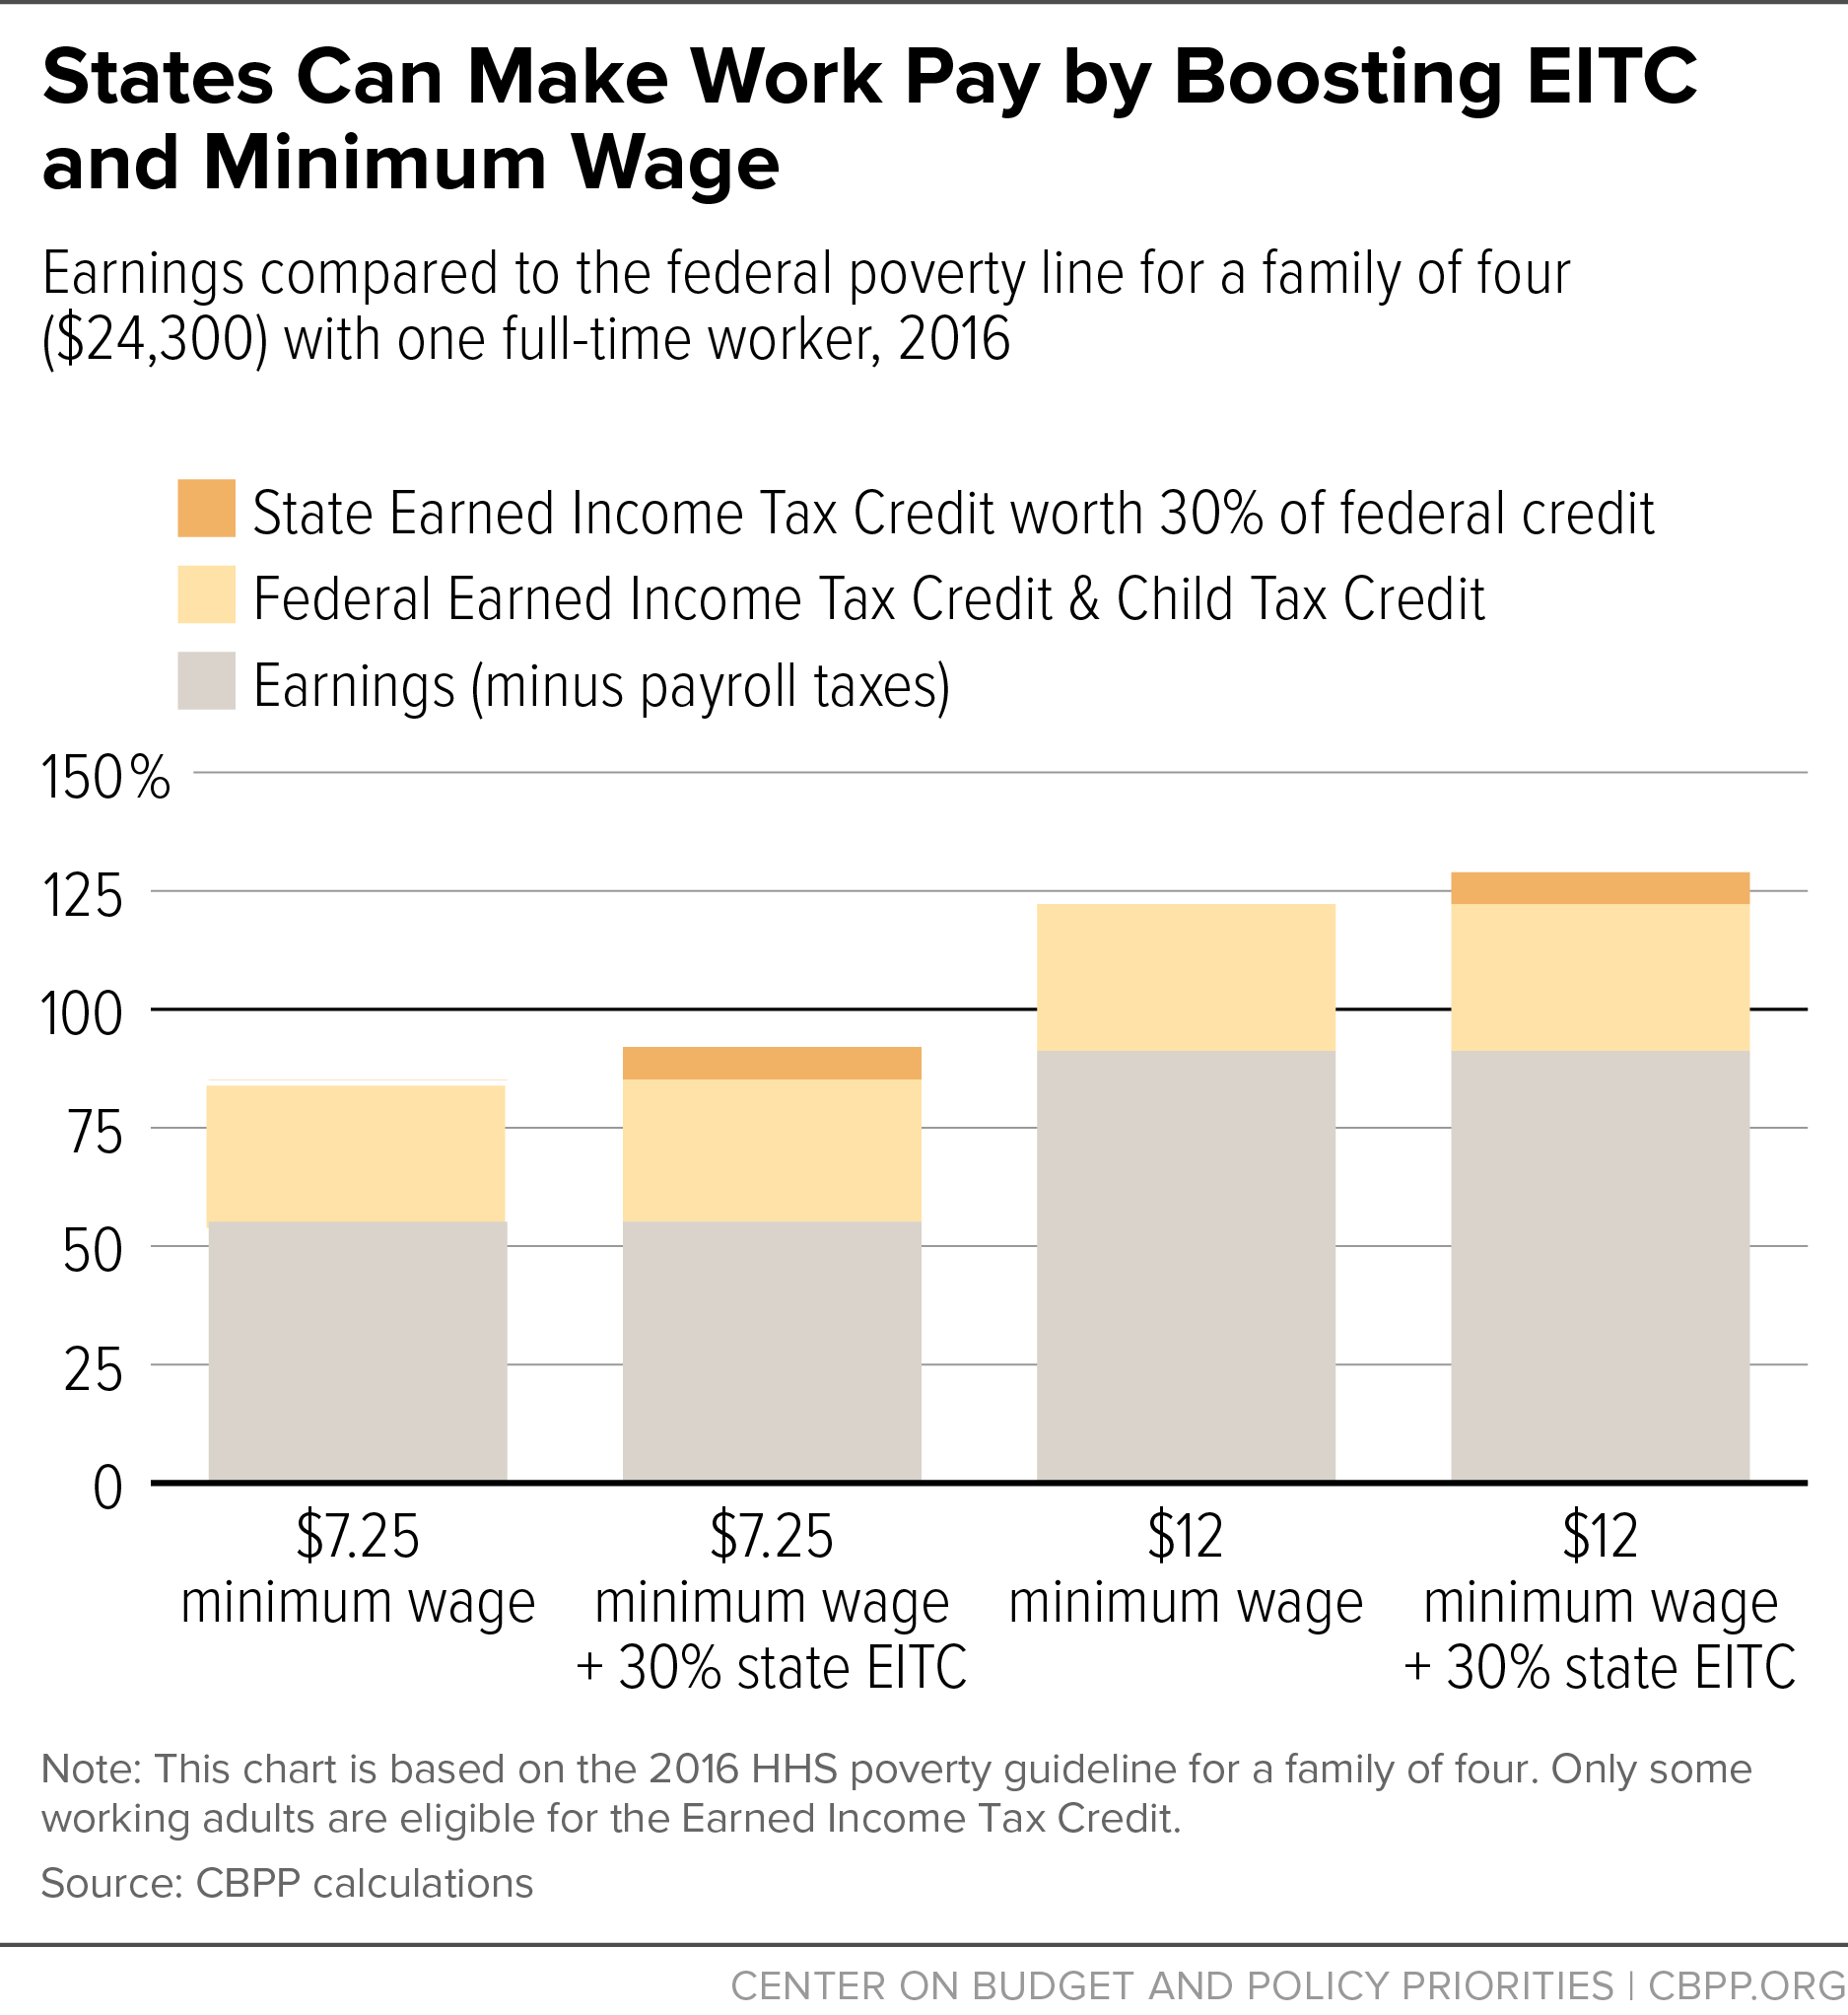 States Can Make Work Pay by Boosting EITC and Minimum Wage